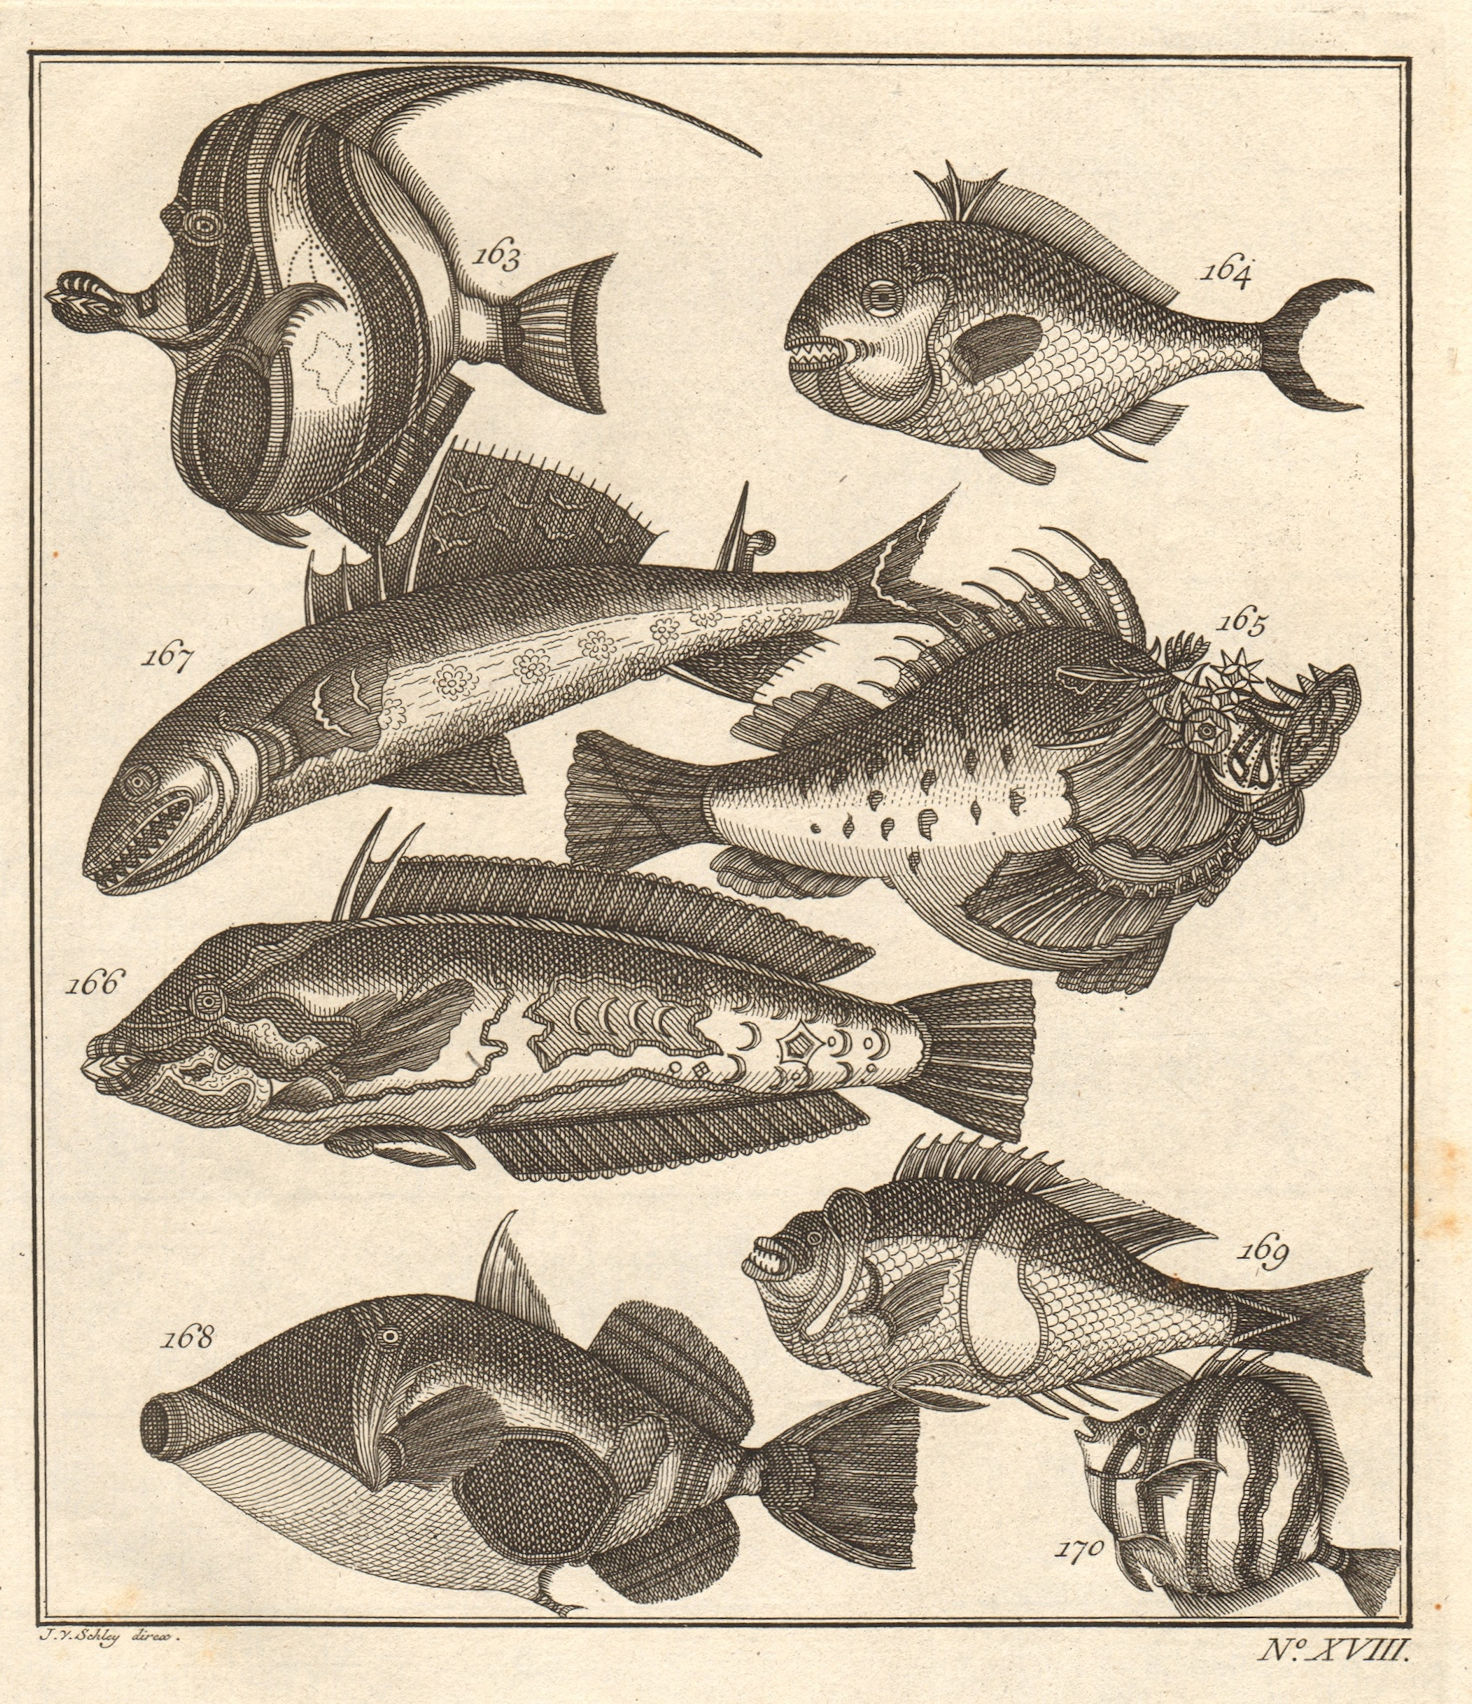 Associate Product XVIII. Poissons d'Ambione. Indonesia Moluccas Maluku tropical fish. SCHLEY 1763